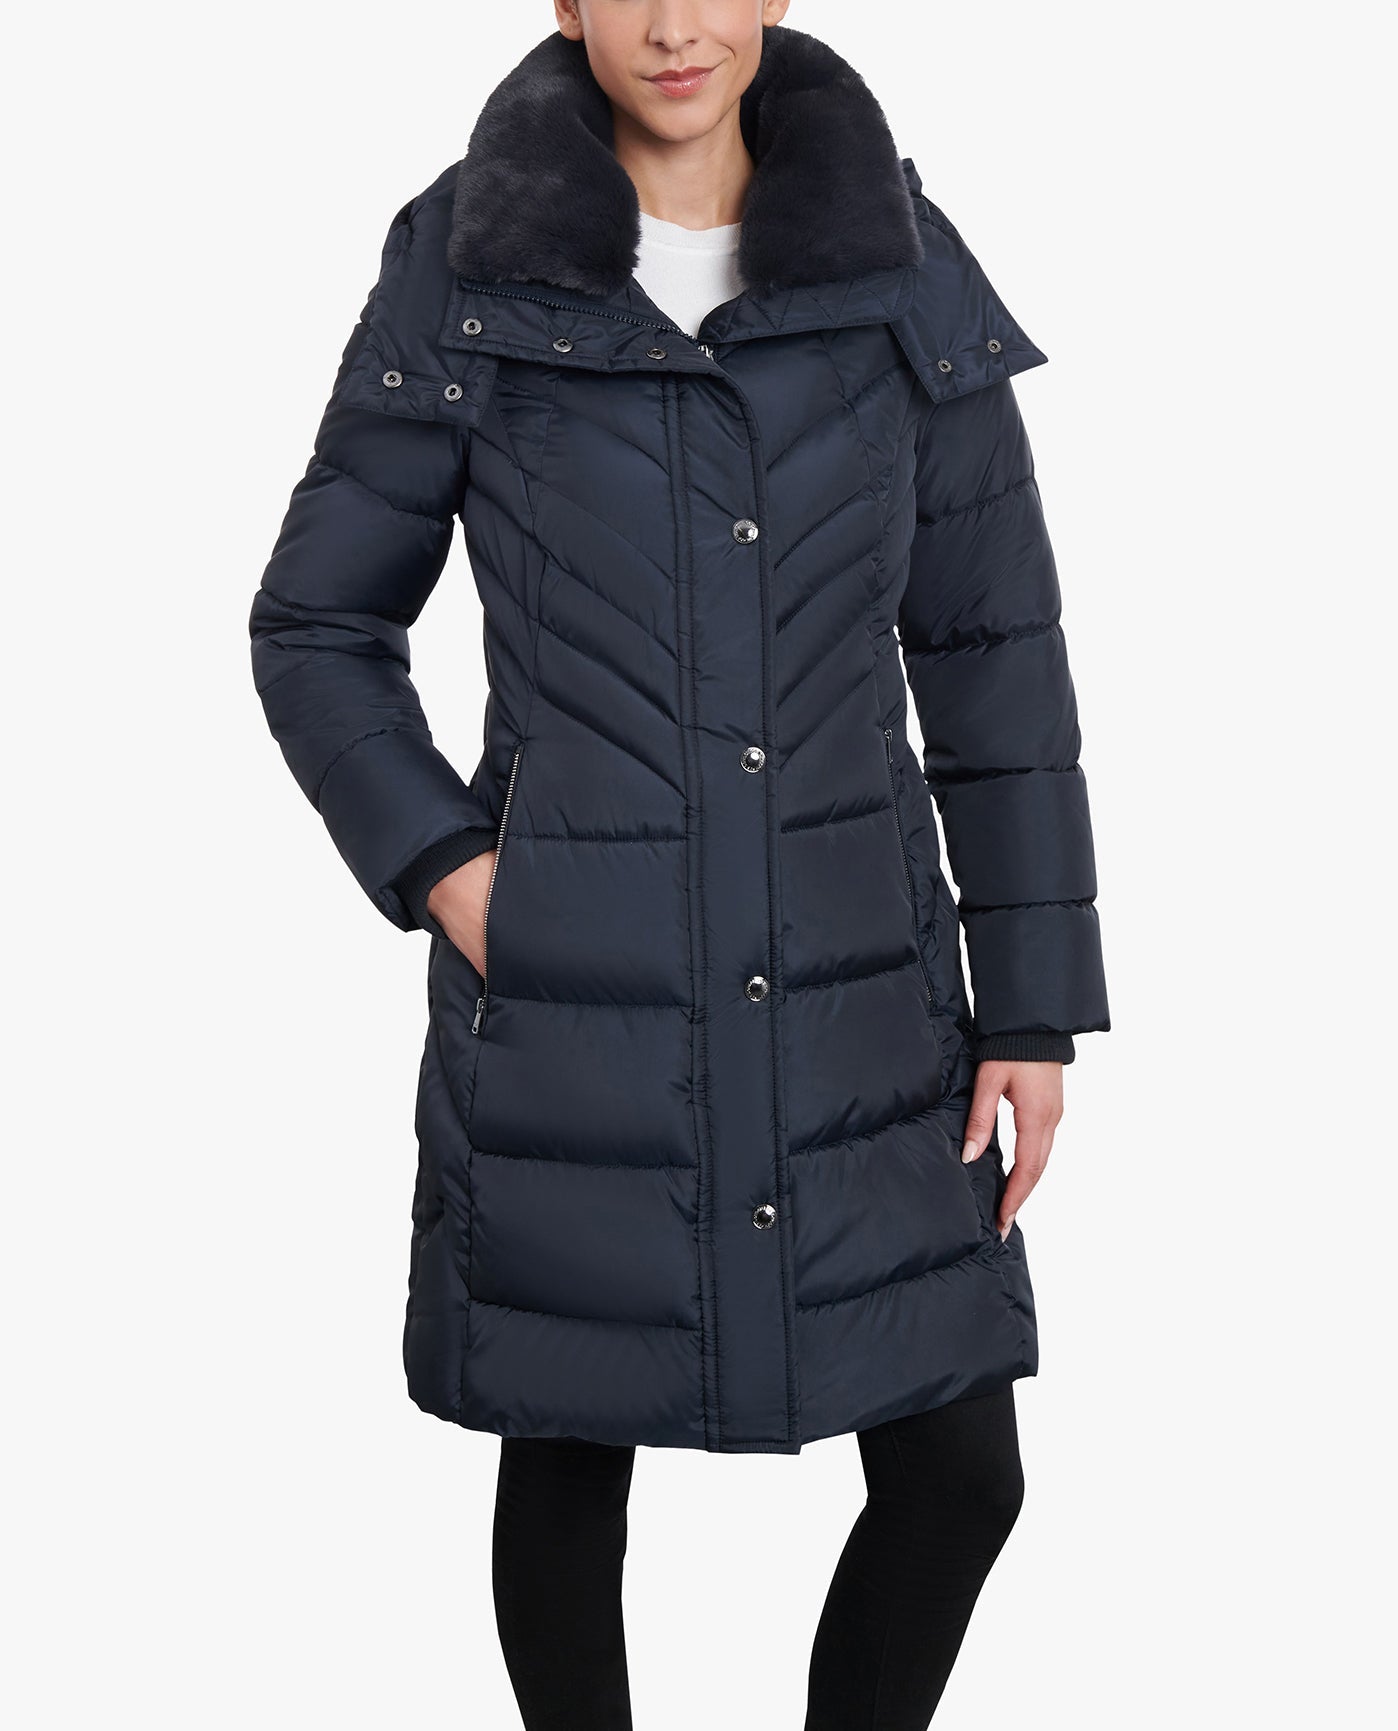 FRONT VIEW OF ZIP-FRONT HOODED HEAVY WEIGHT PUFFER JACKET WITH BUTTON-OFF FUR COLLAR | NAVY